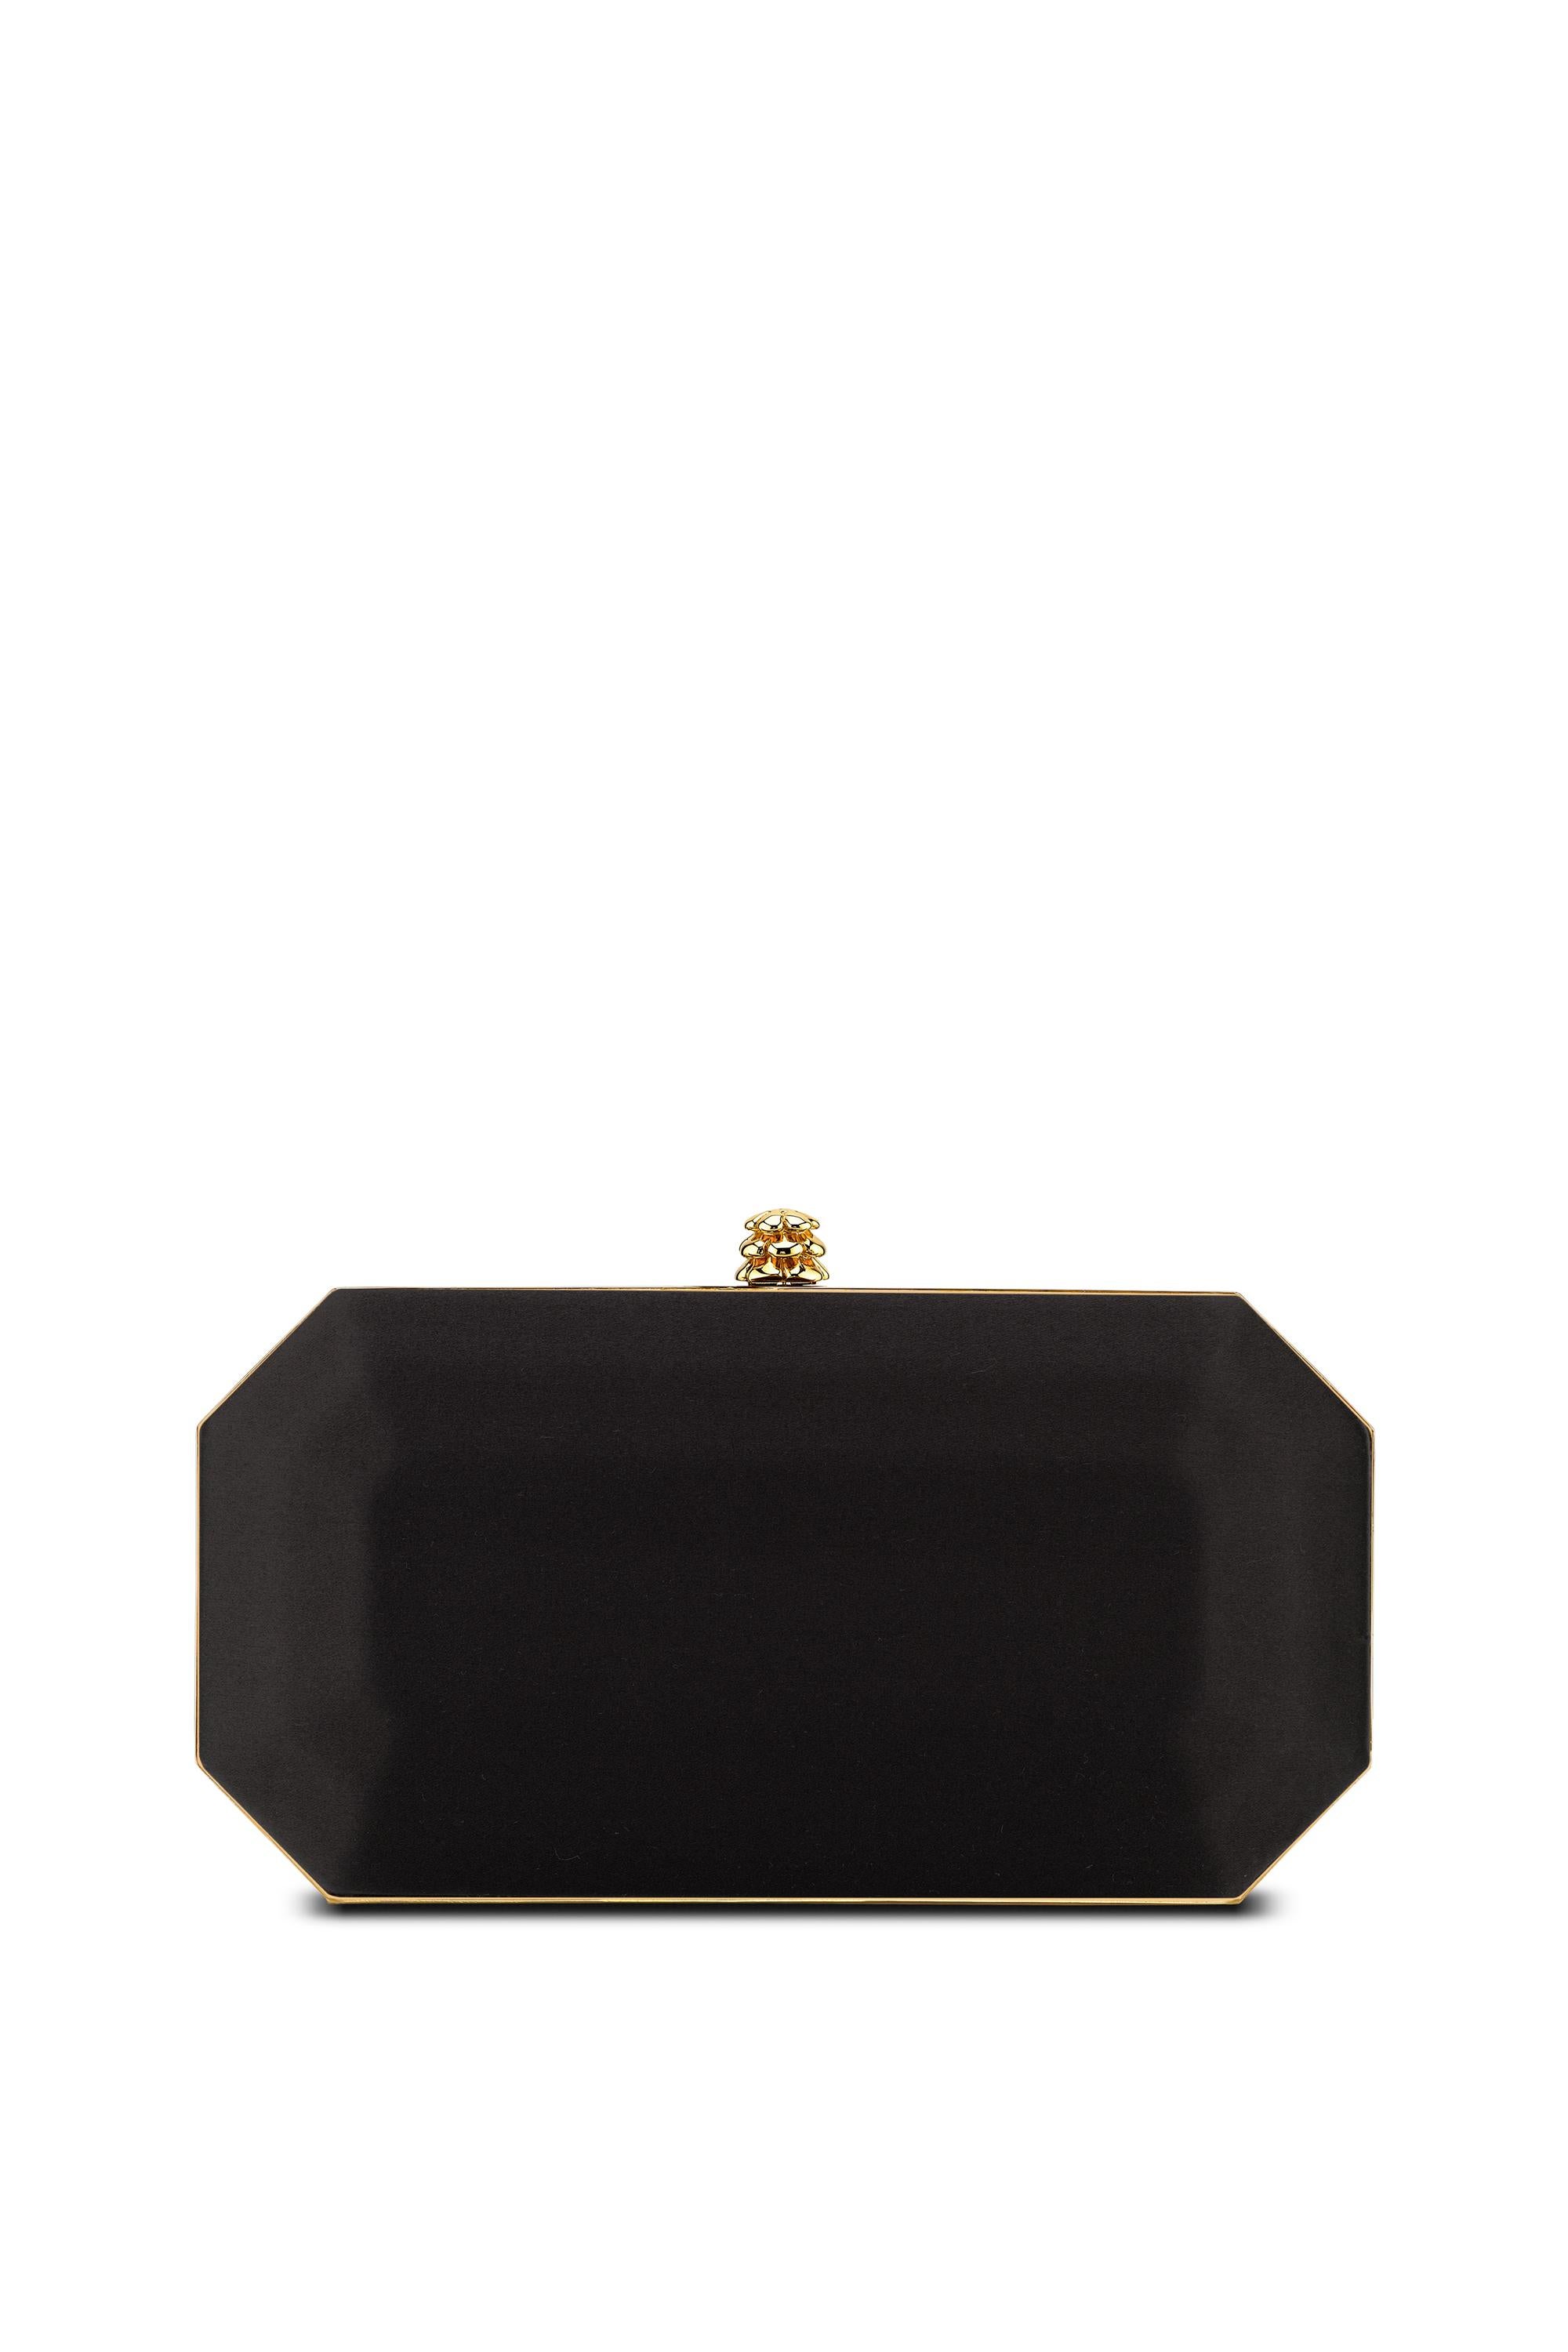 The Perry Small is featured in our Black Diamond satin with gold hardware. The Perry is a hard-framed clutch designed with interior pockets and an optional gold cross-body chain. It's elegant emerald shape is inspired by Tyler's own engagement ring